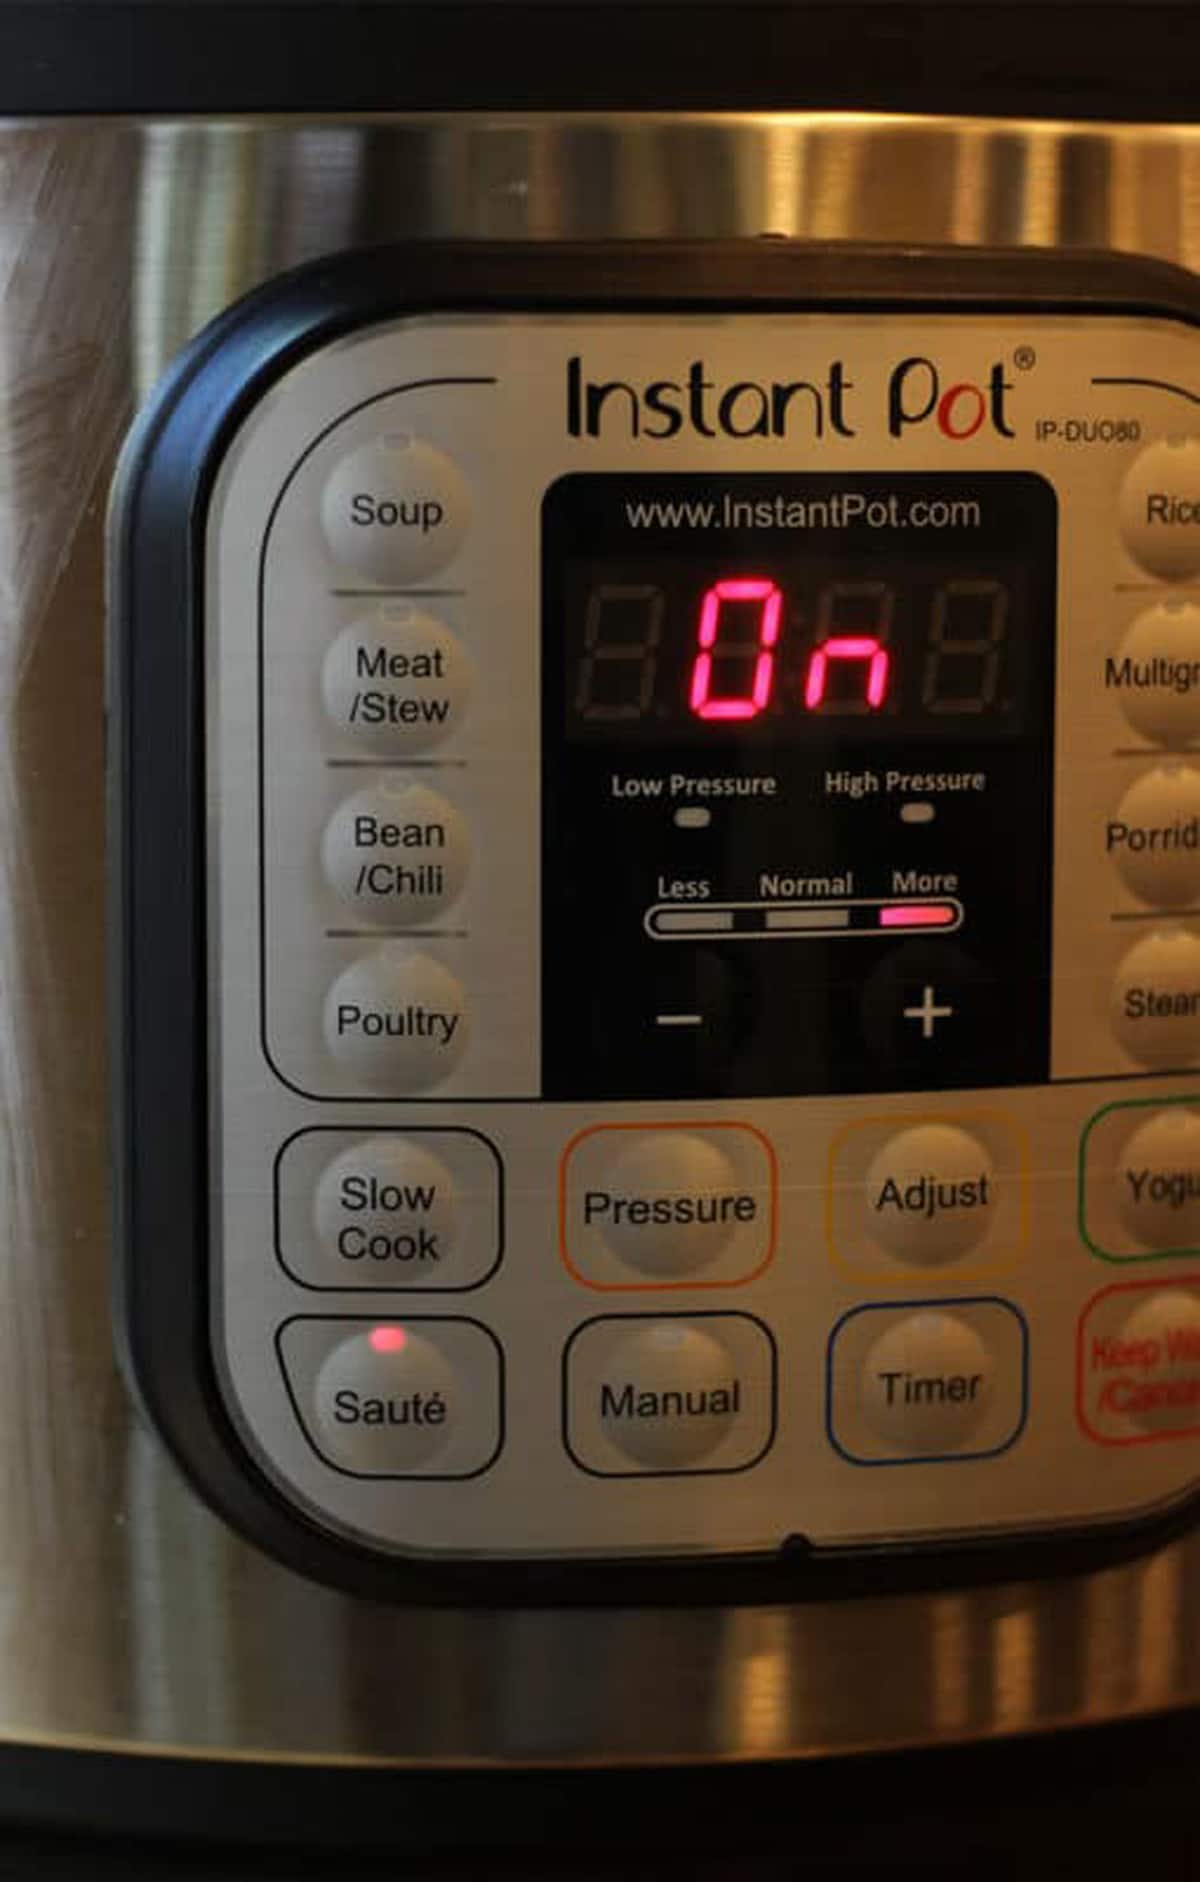 Instant Pot featuring the On feature for Saute.